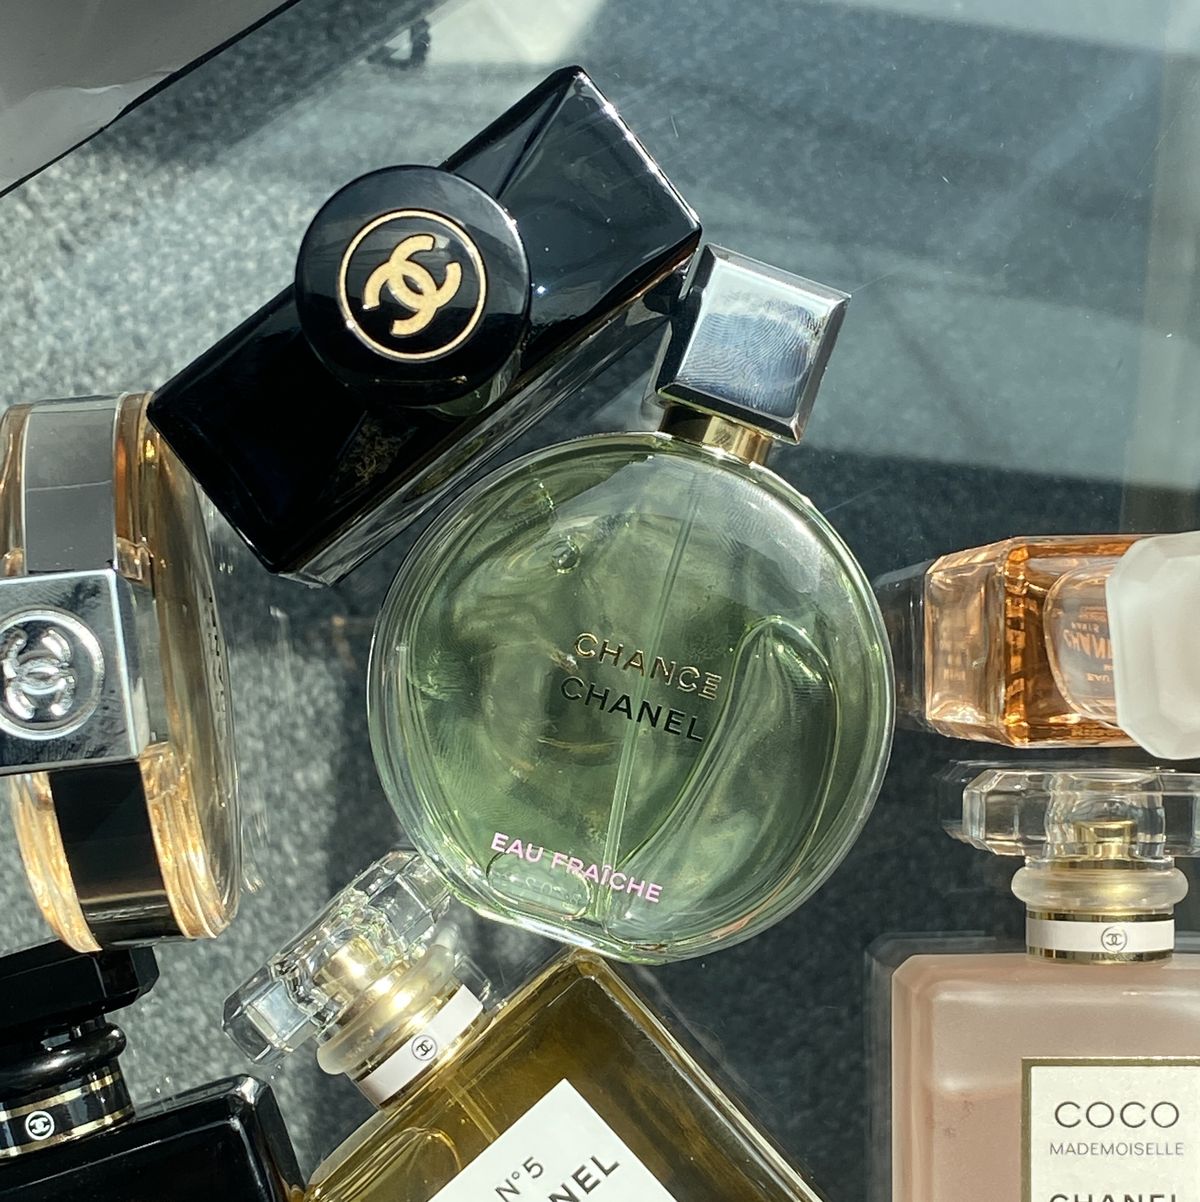 Best Chanel Perfumes of 2023 - Chanel Fragrances Worth Buying